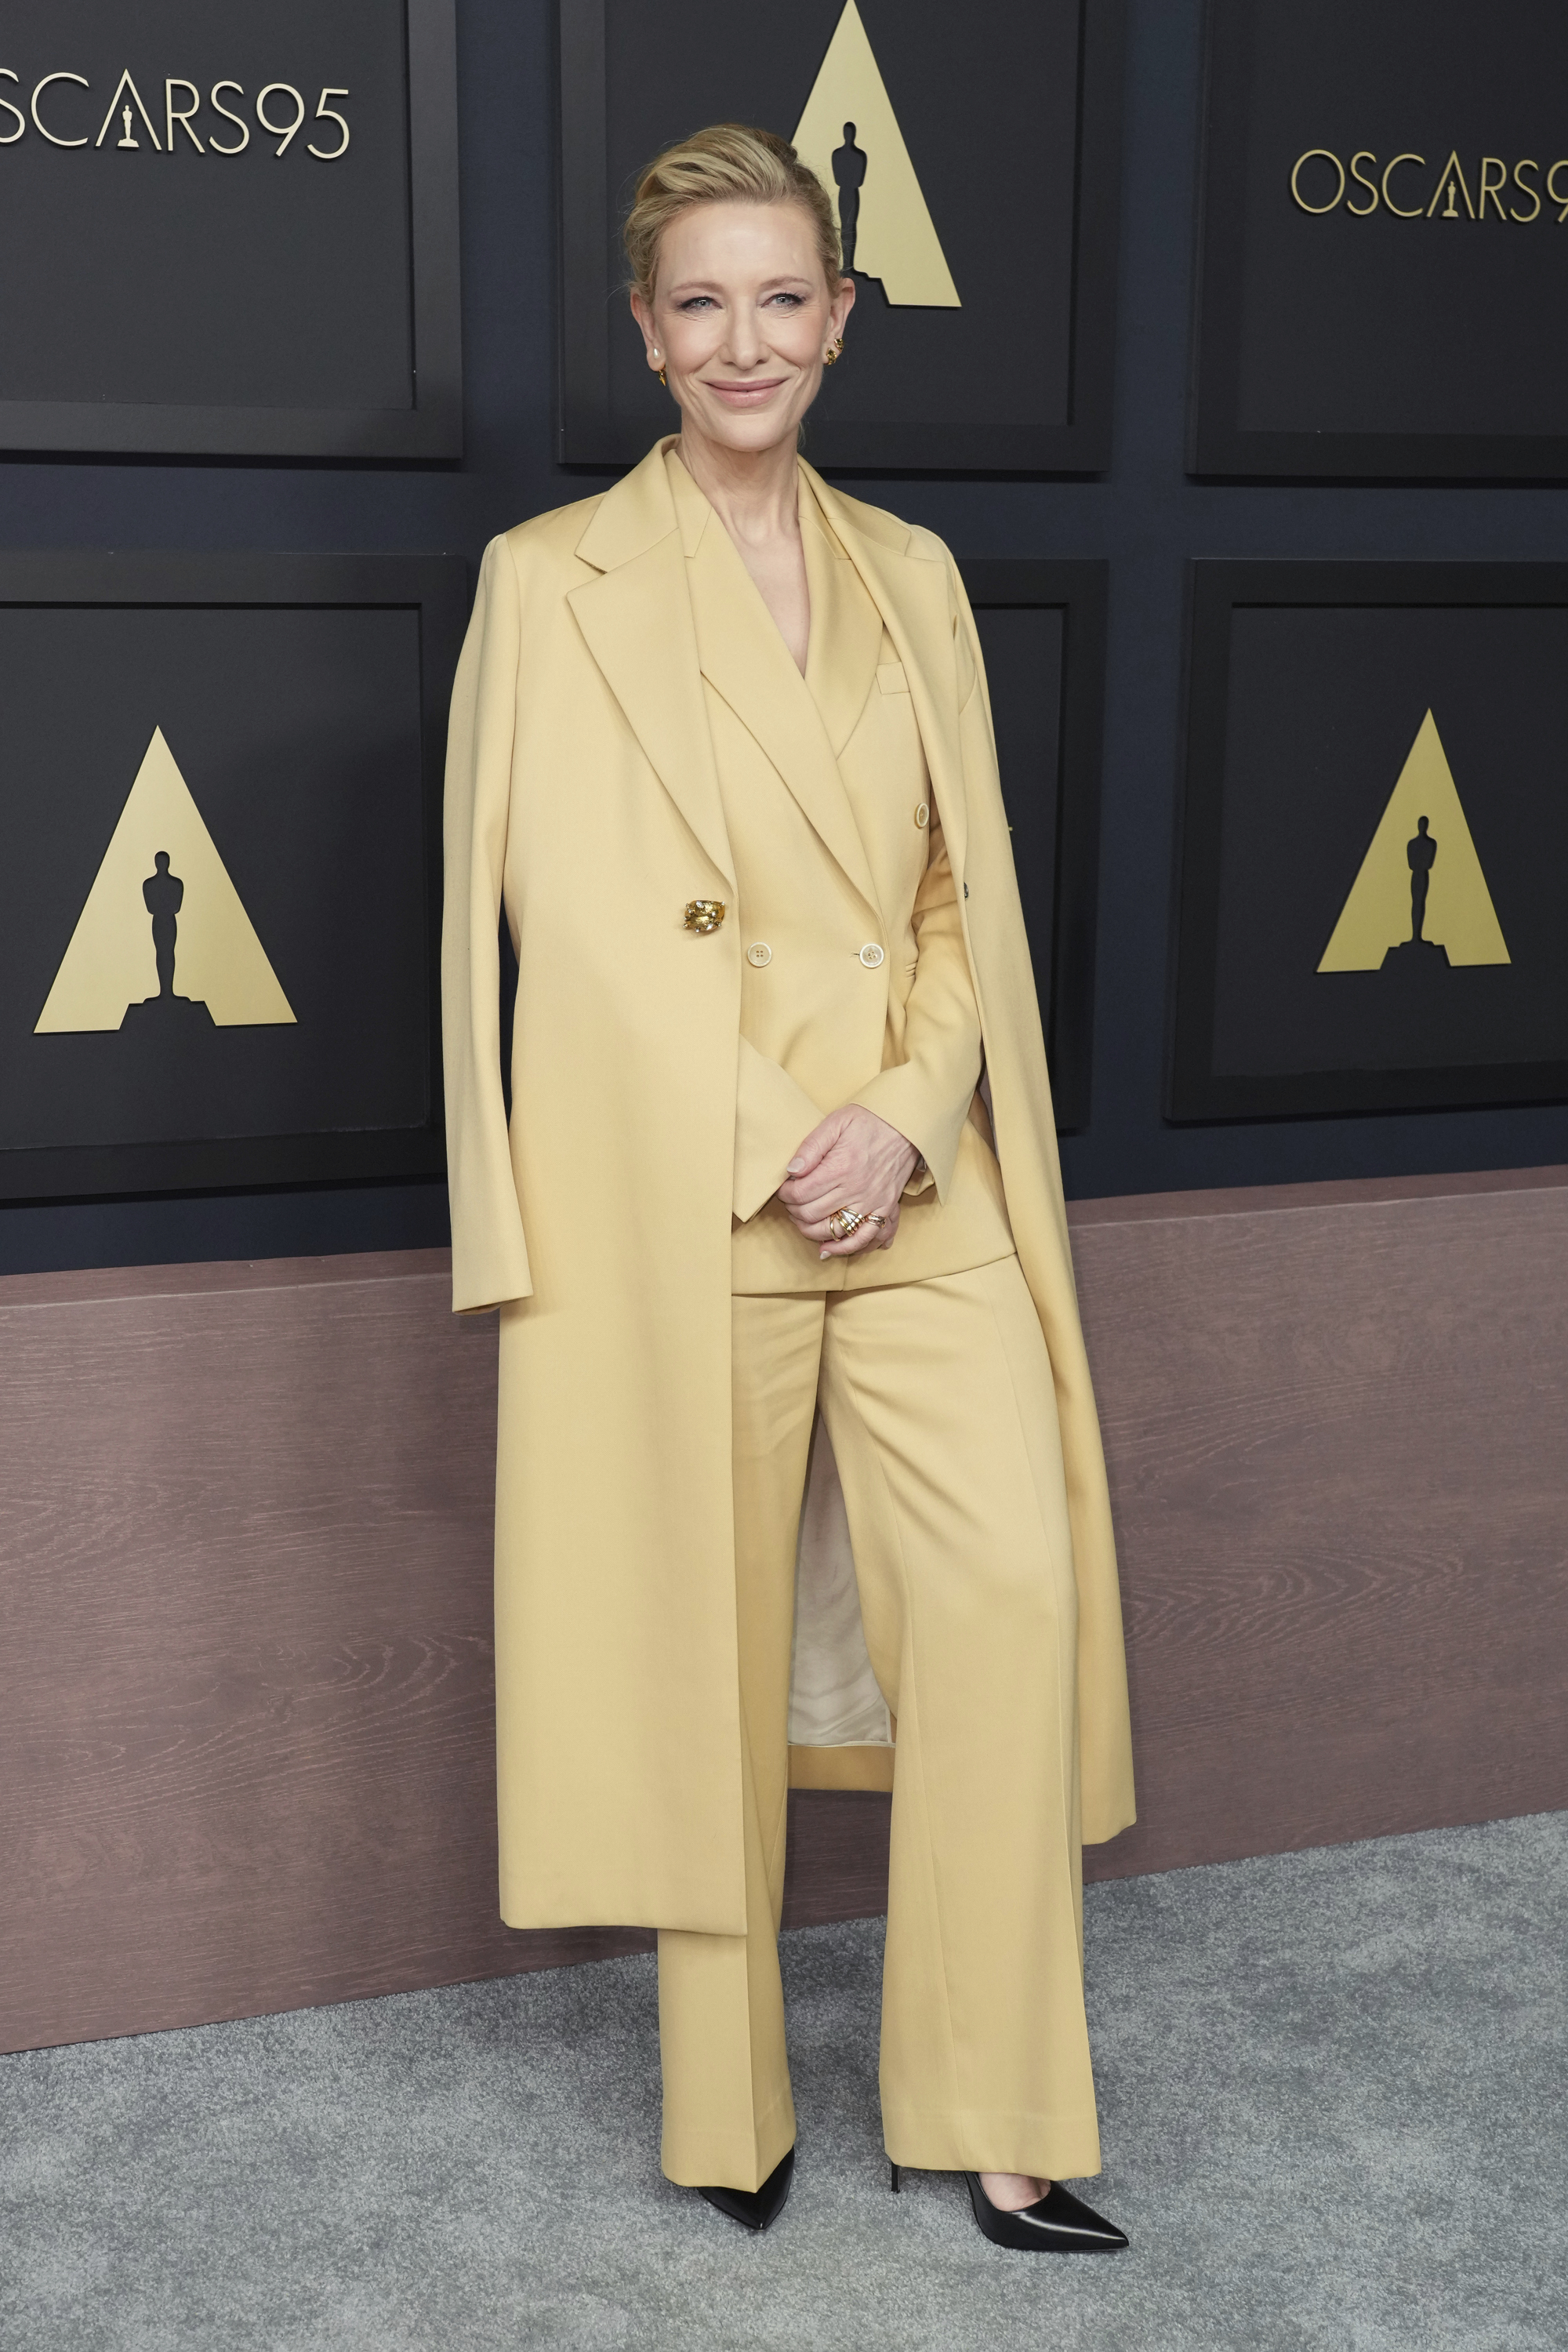 Cate Blanchett wearing a pale yellow pantsuit with a long coat in the same colour draped over her shoulders